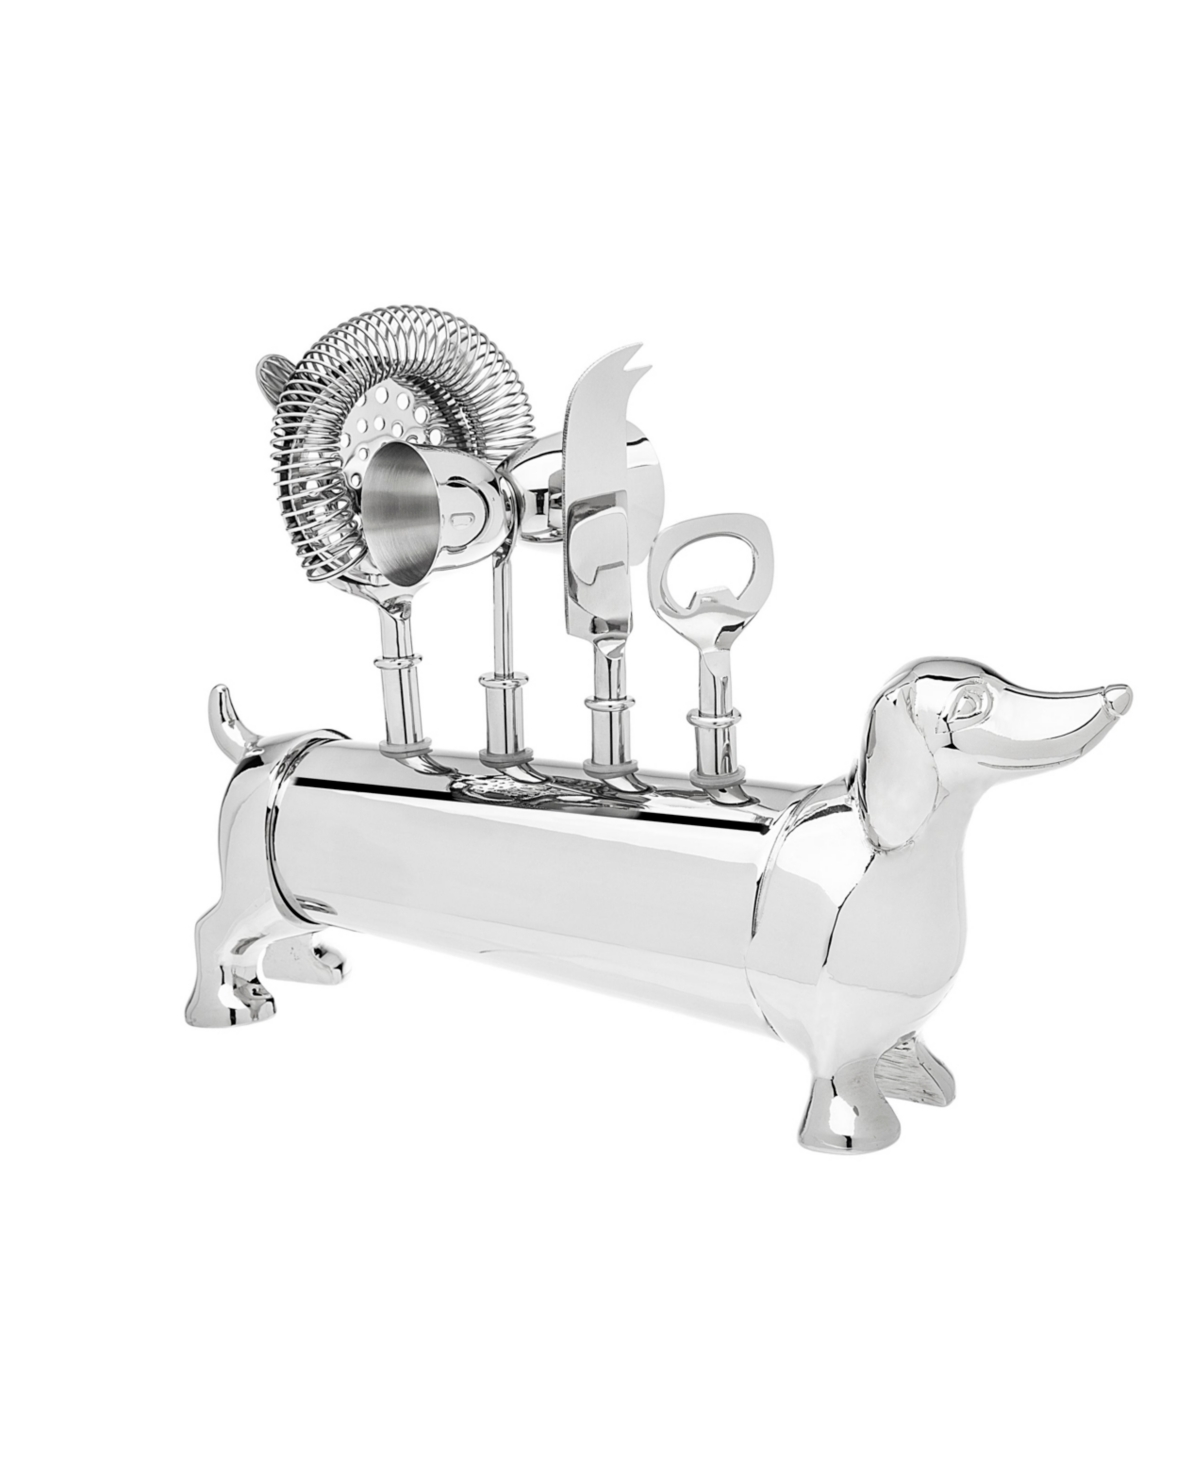 Godinger The Dachshund Bar Tool Set Holds All The Bar Tools That Everyone Needs For Their Bar-strainer- Doubl In Silver